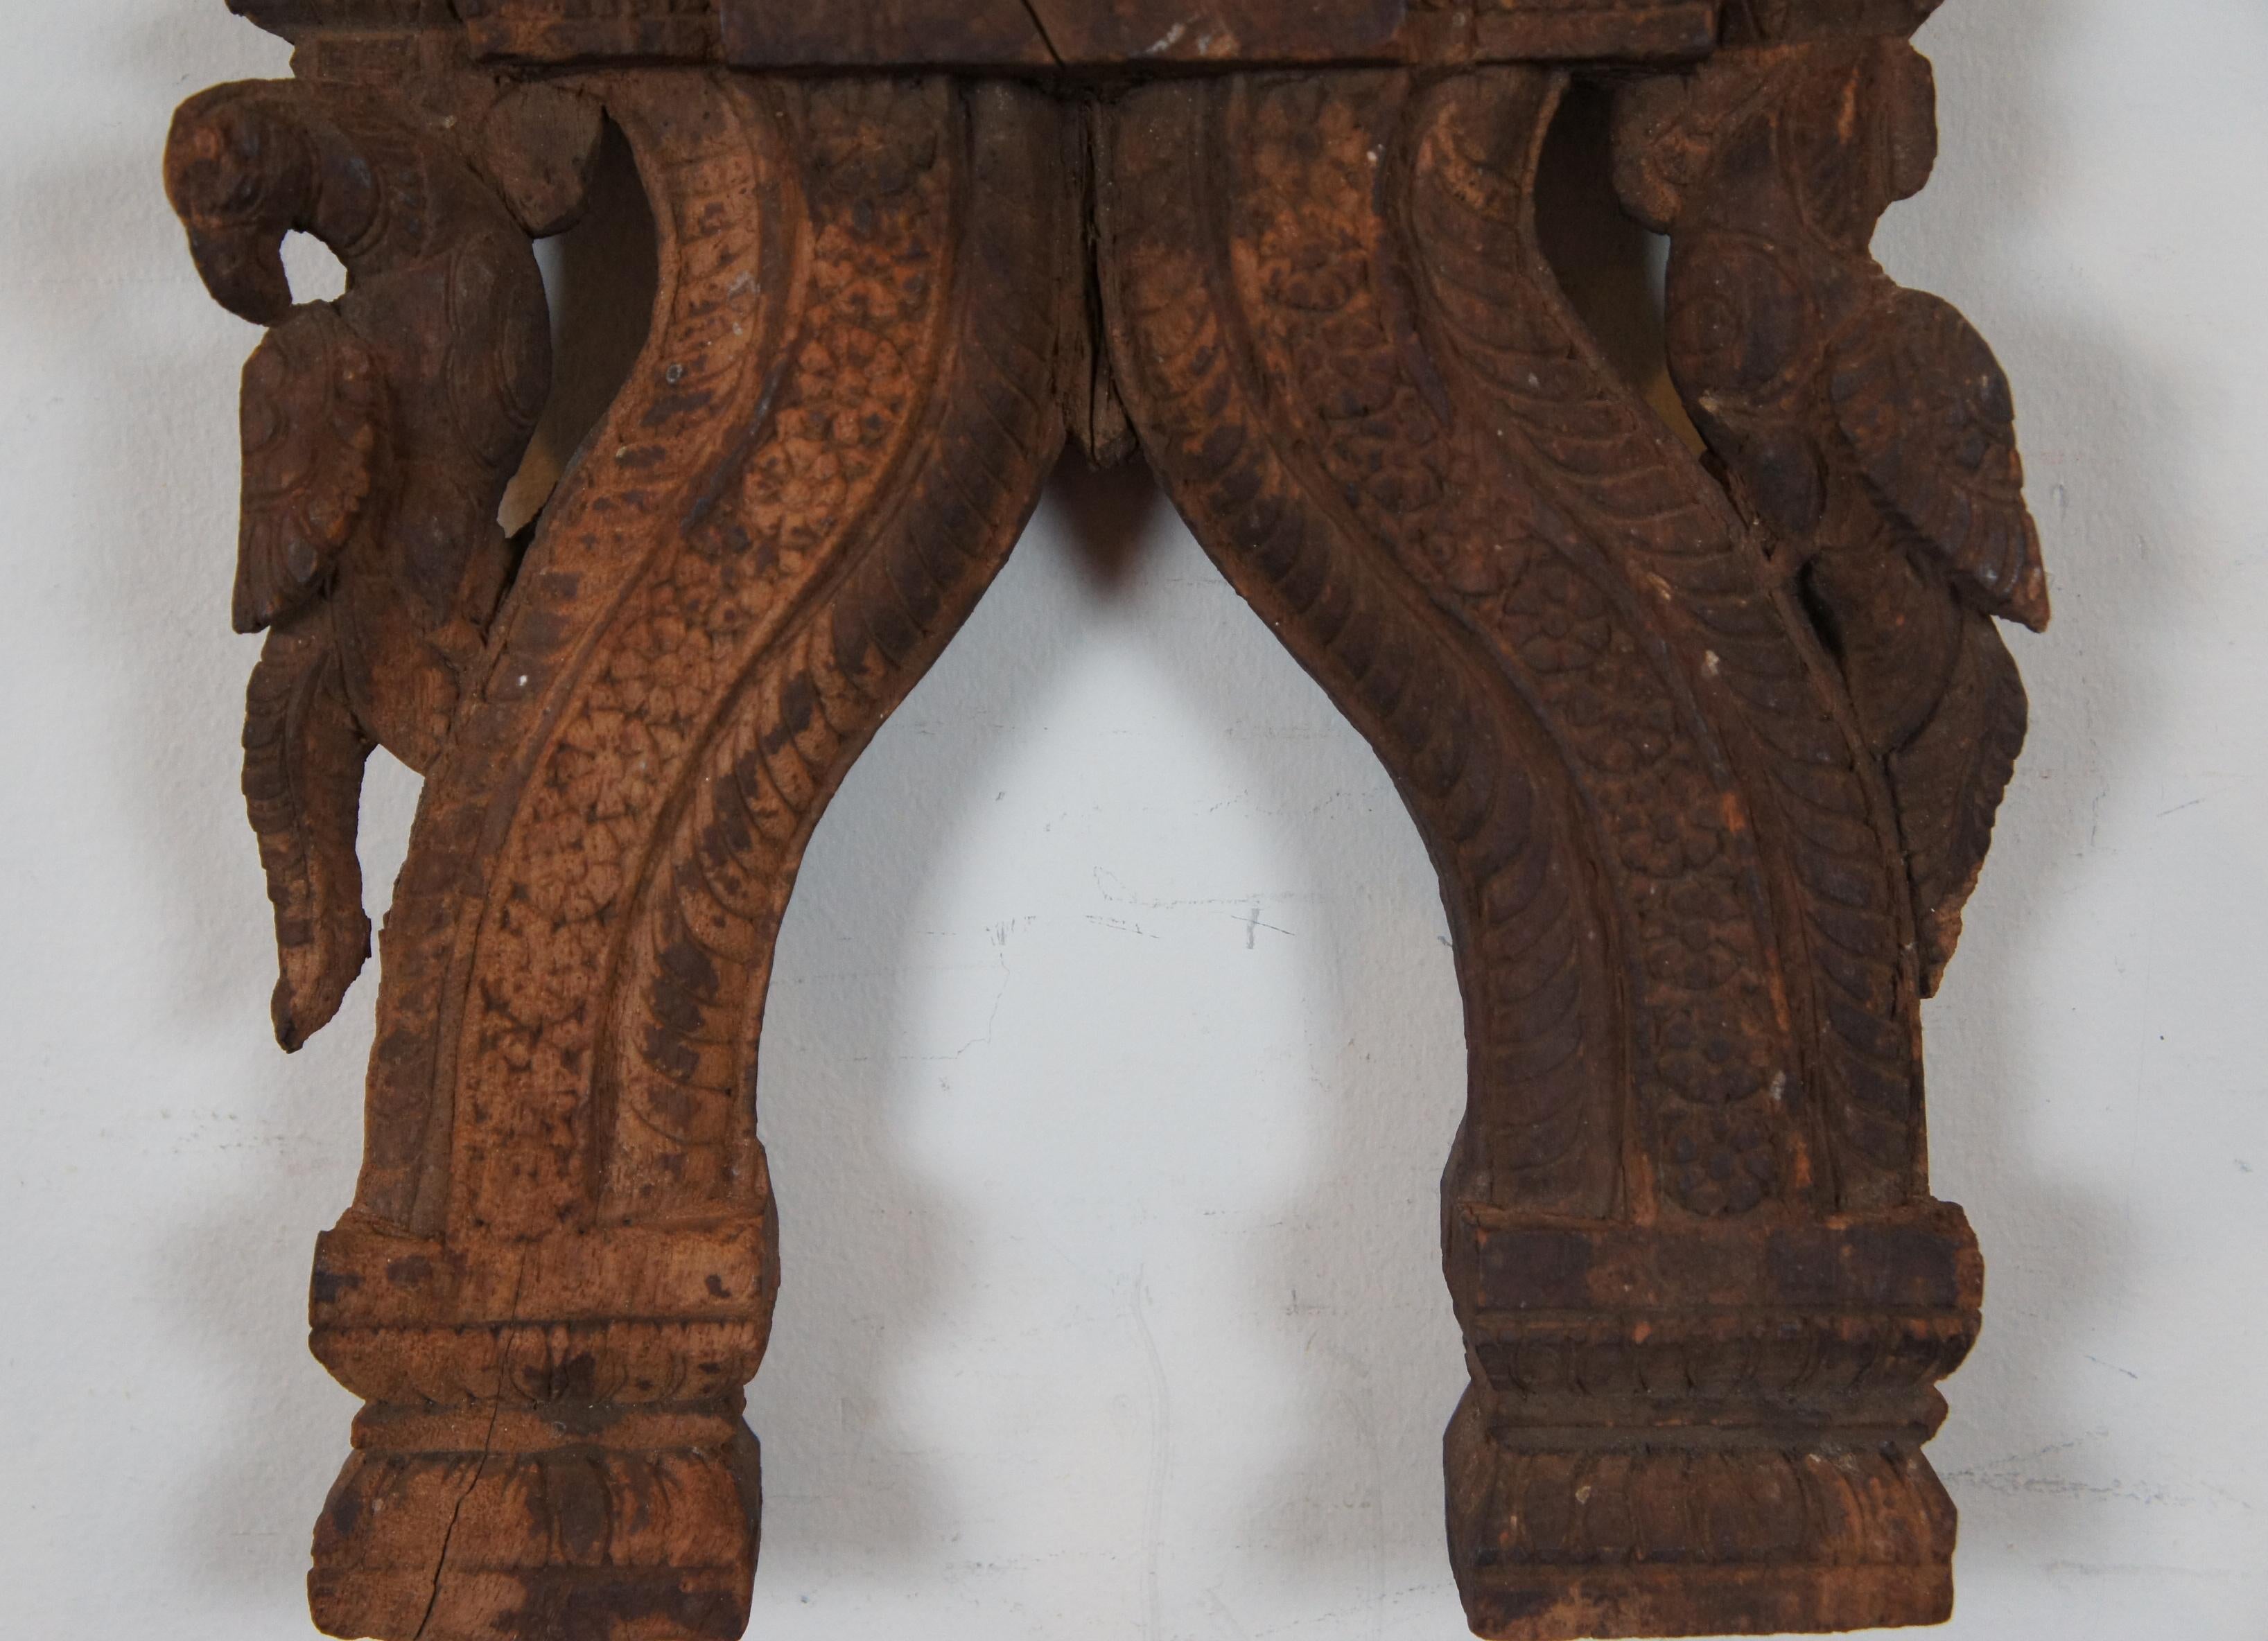 19th Century Antique Carved Wooden Hanging Hindu Temple Lord Ganesha Deity Plaque For Sale